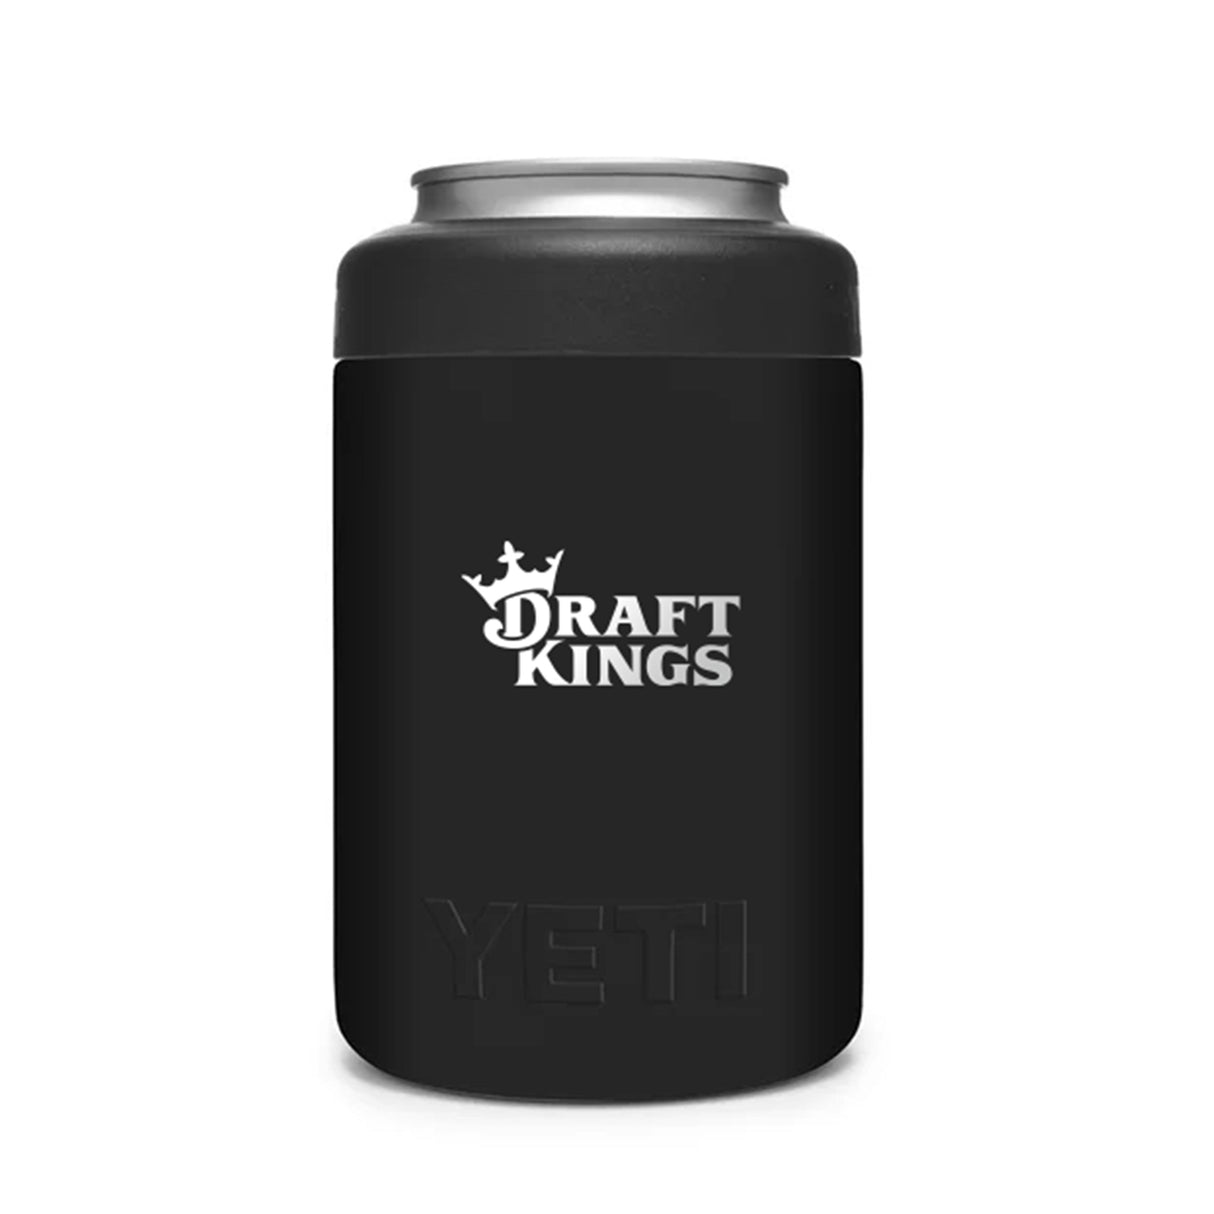 Yeti 12 Oz Slim Can Colster With FREE Laser Engraving Slim Can Insulator 